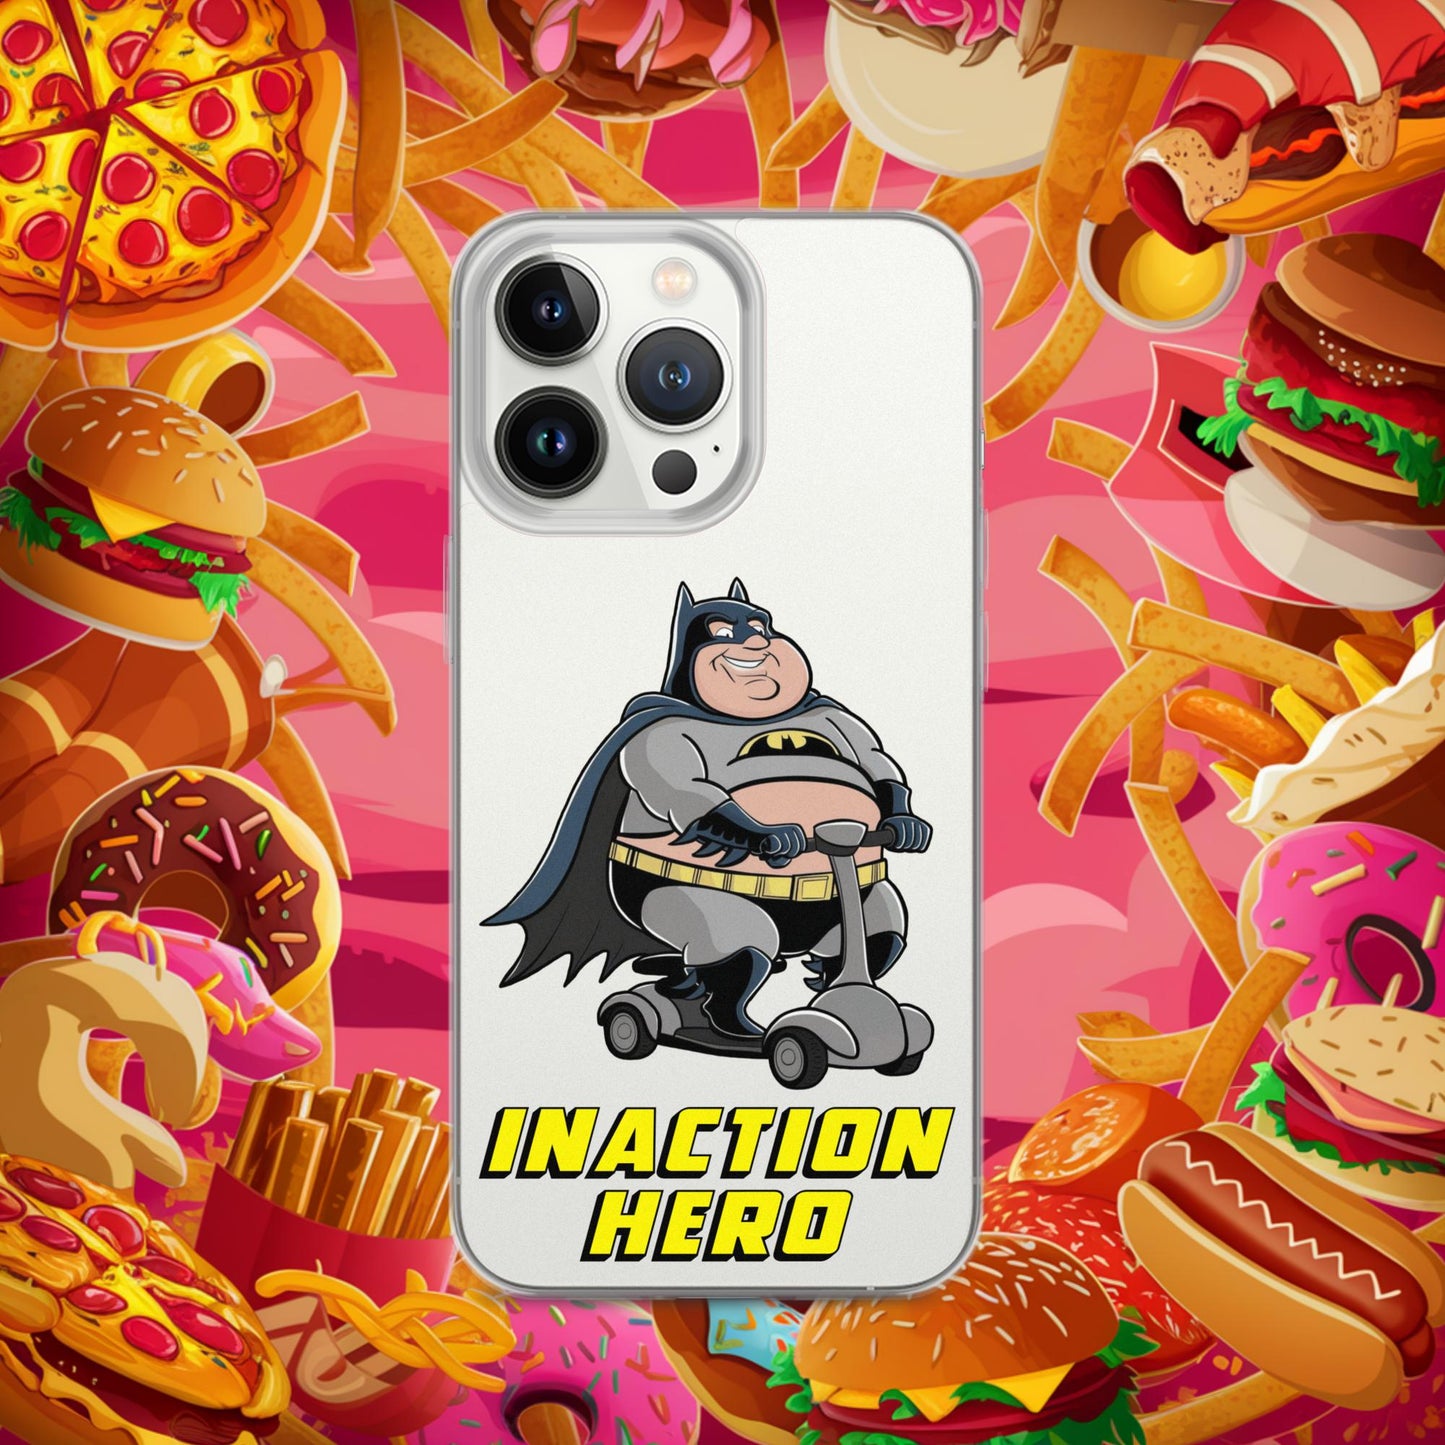 Inaction Hero Fatman Superhero Clear Case for iPhone Next Cult Brand